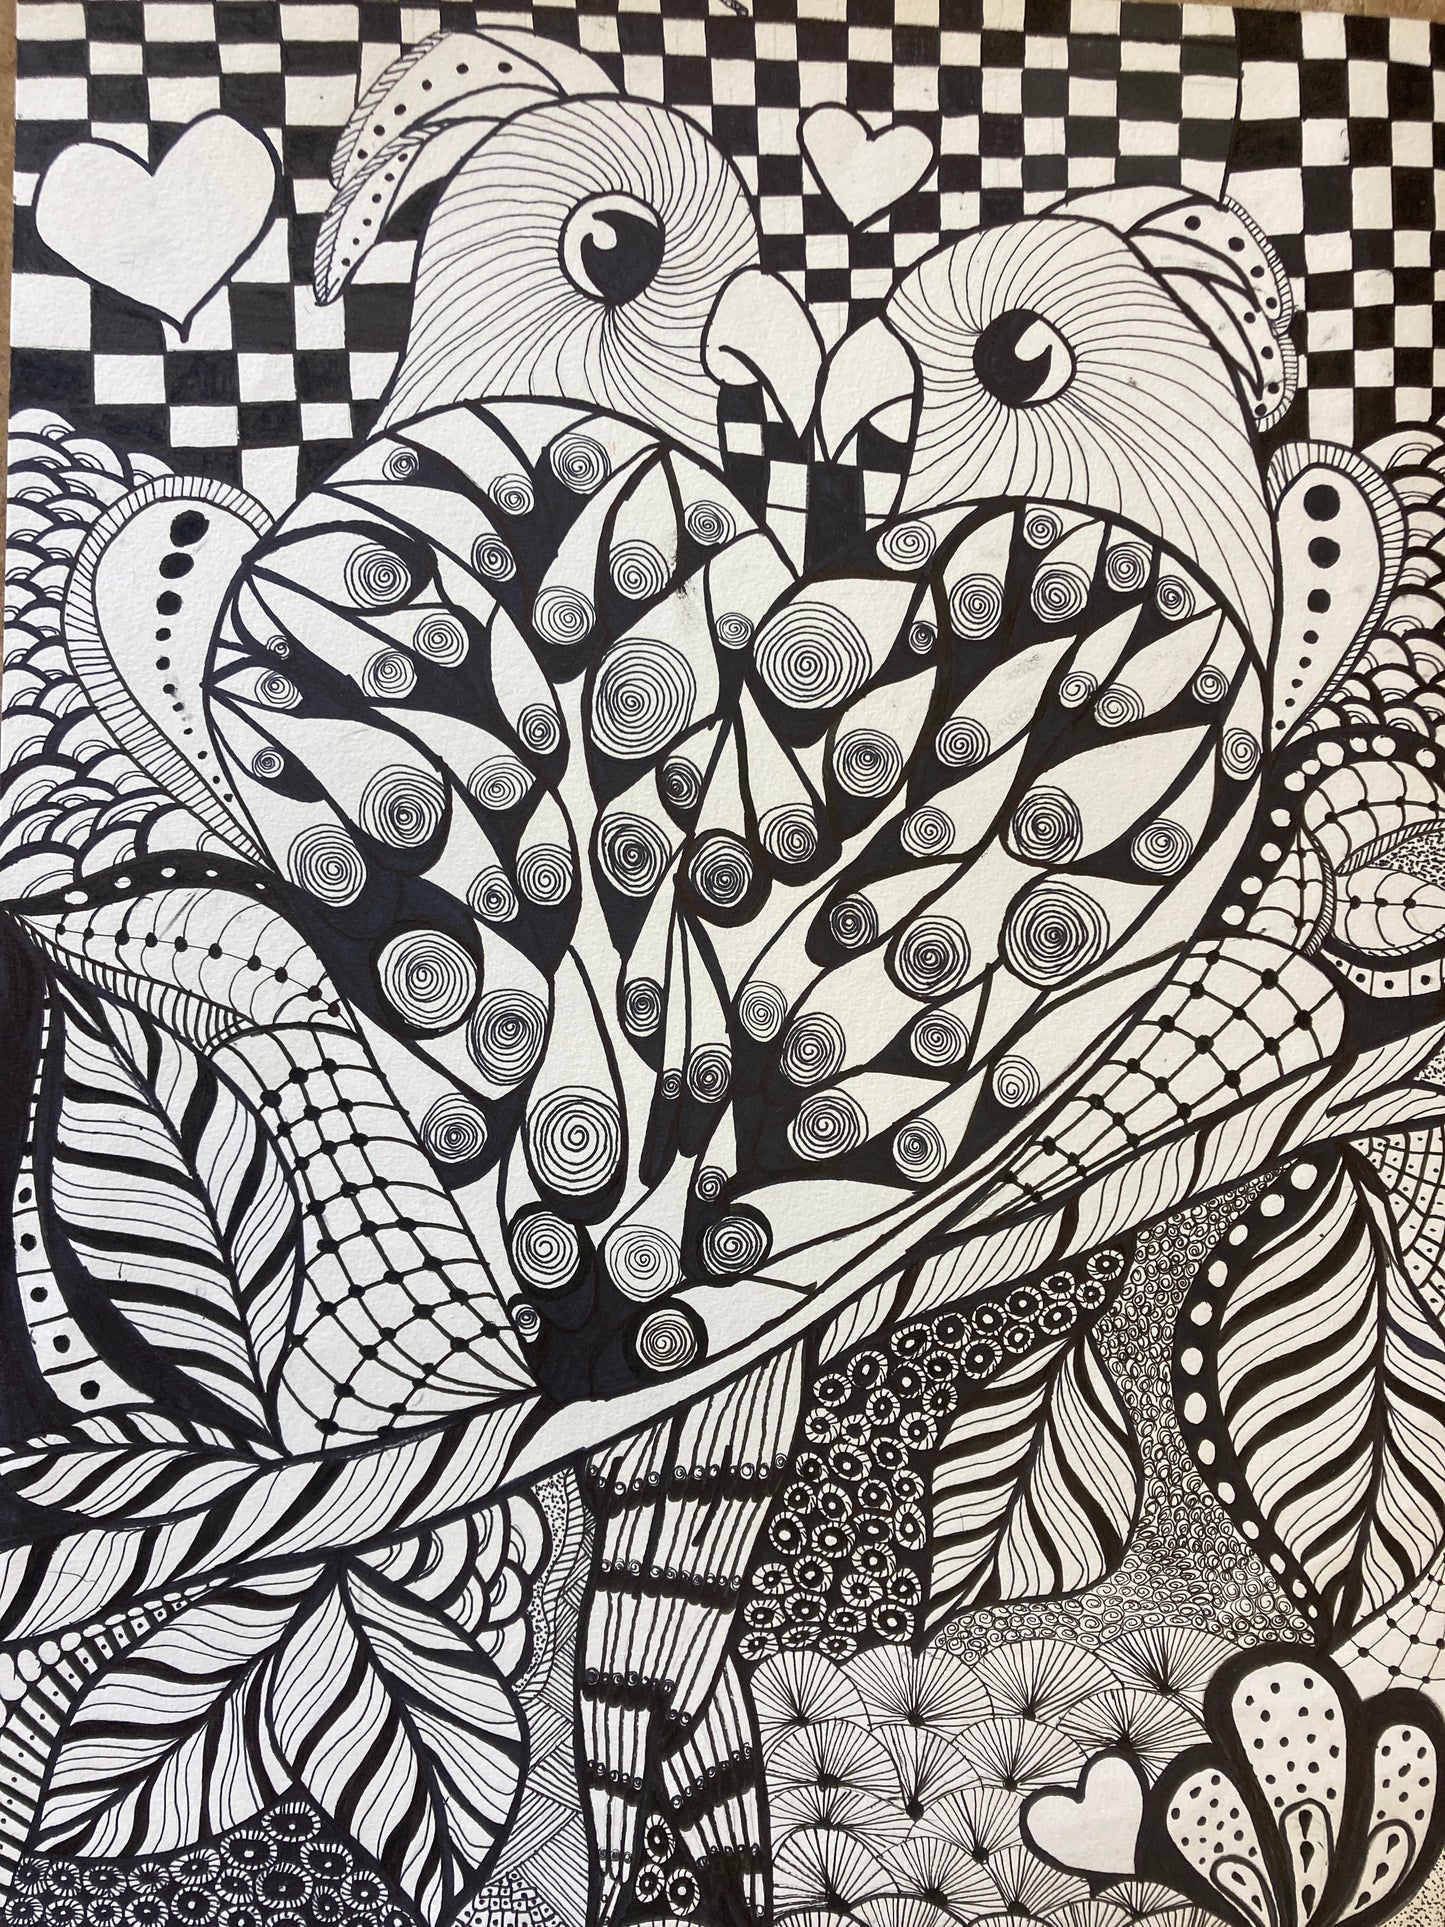 Zentangle - What Interests Me Project (Yeimi)